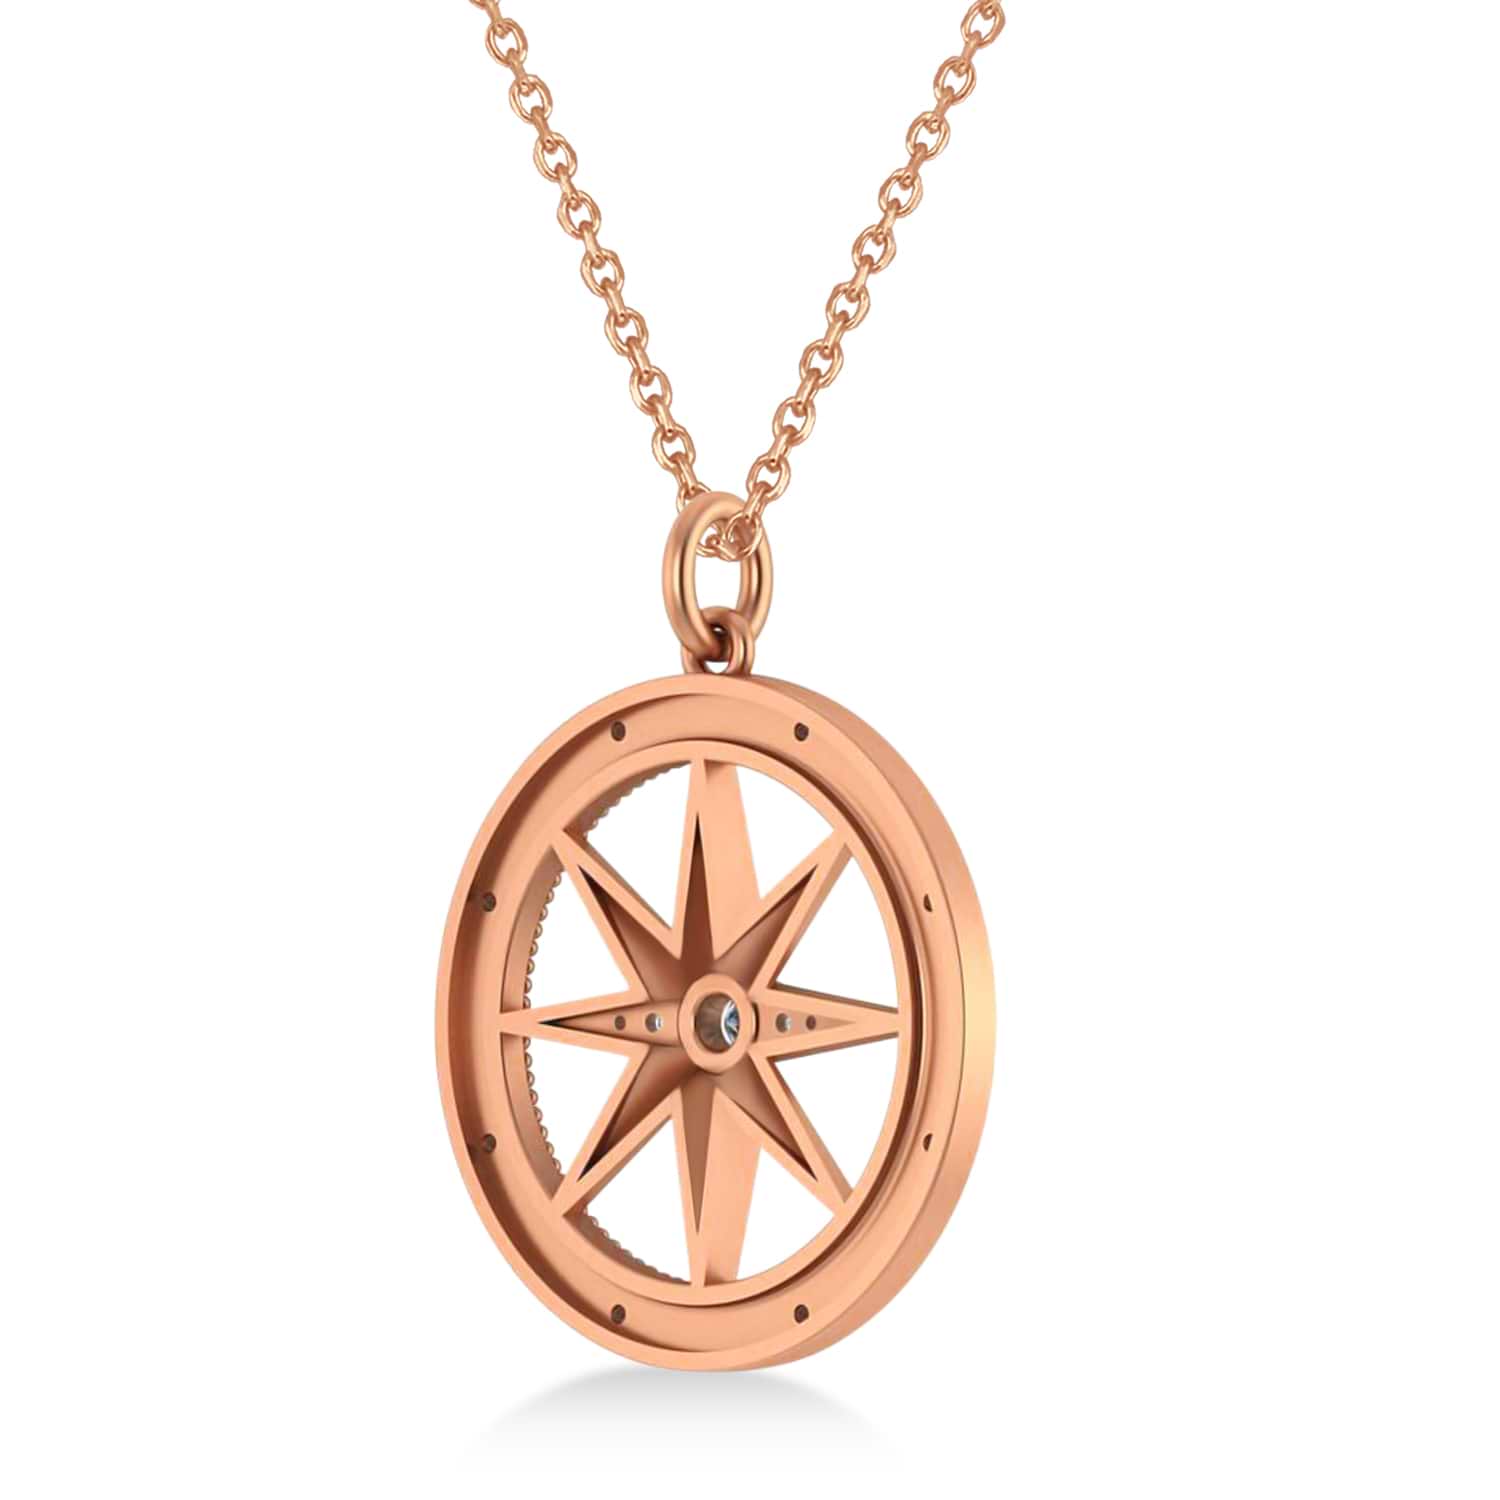 Large Compass Necklace Pendant For Men Lab Grown Diamond Accented 14kRose Gold (0.38ct)